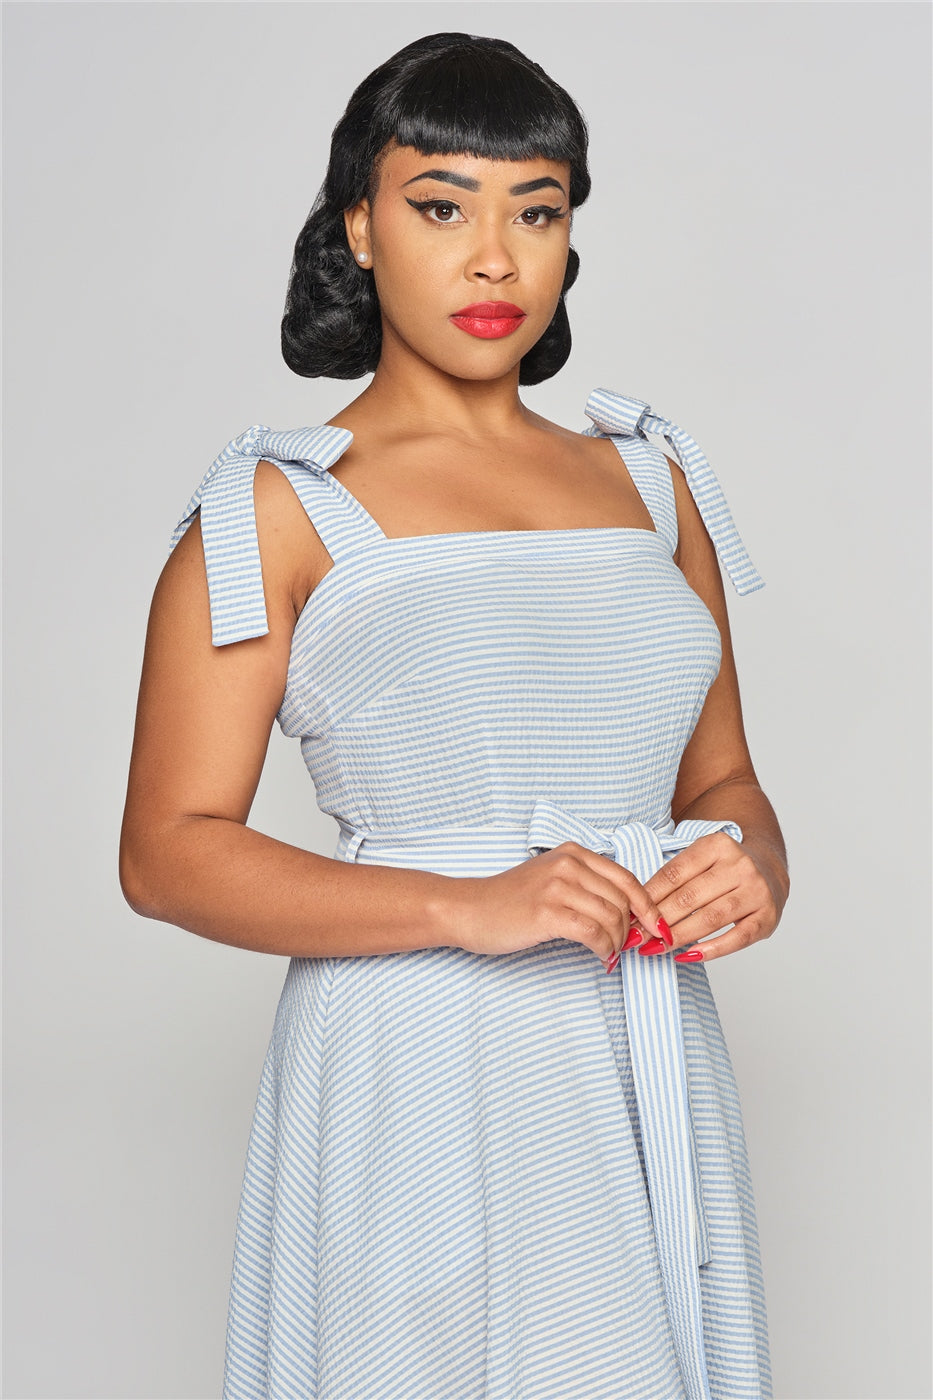 Woman with 50s style makeup wearing a blue and white stripe seersucker dress standing with her hands in front of her waist.